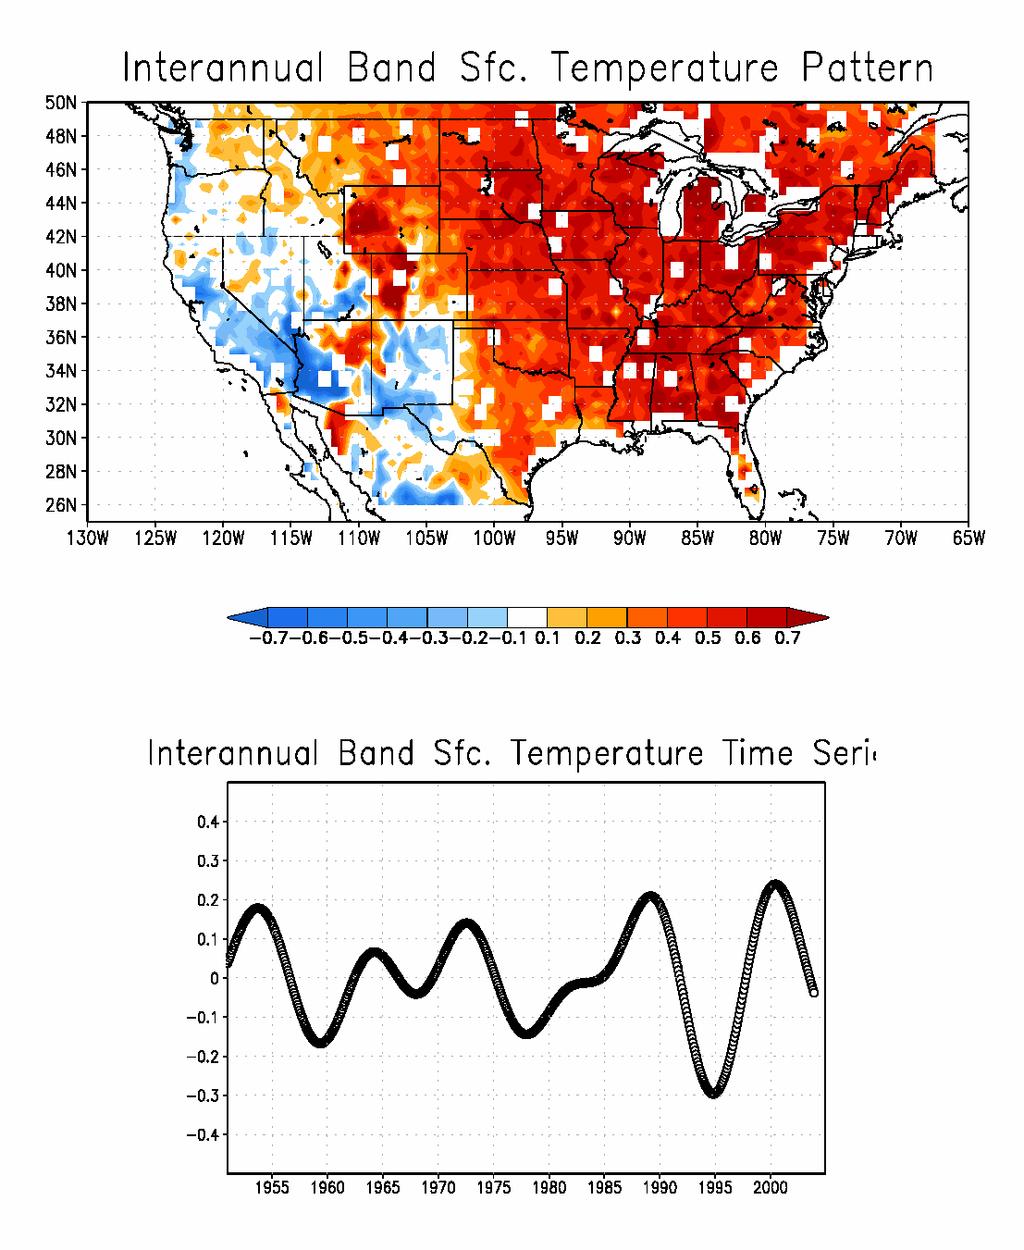 The spatiotemporal pattern of surface temperatur e variability shows higher temperatures occurring the central U.S.